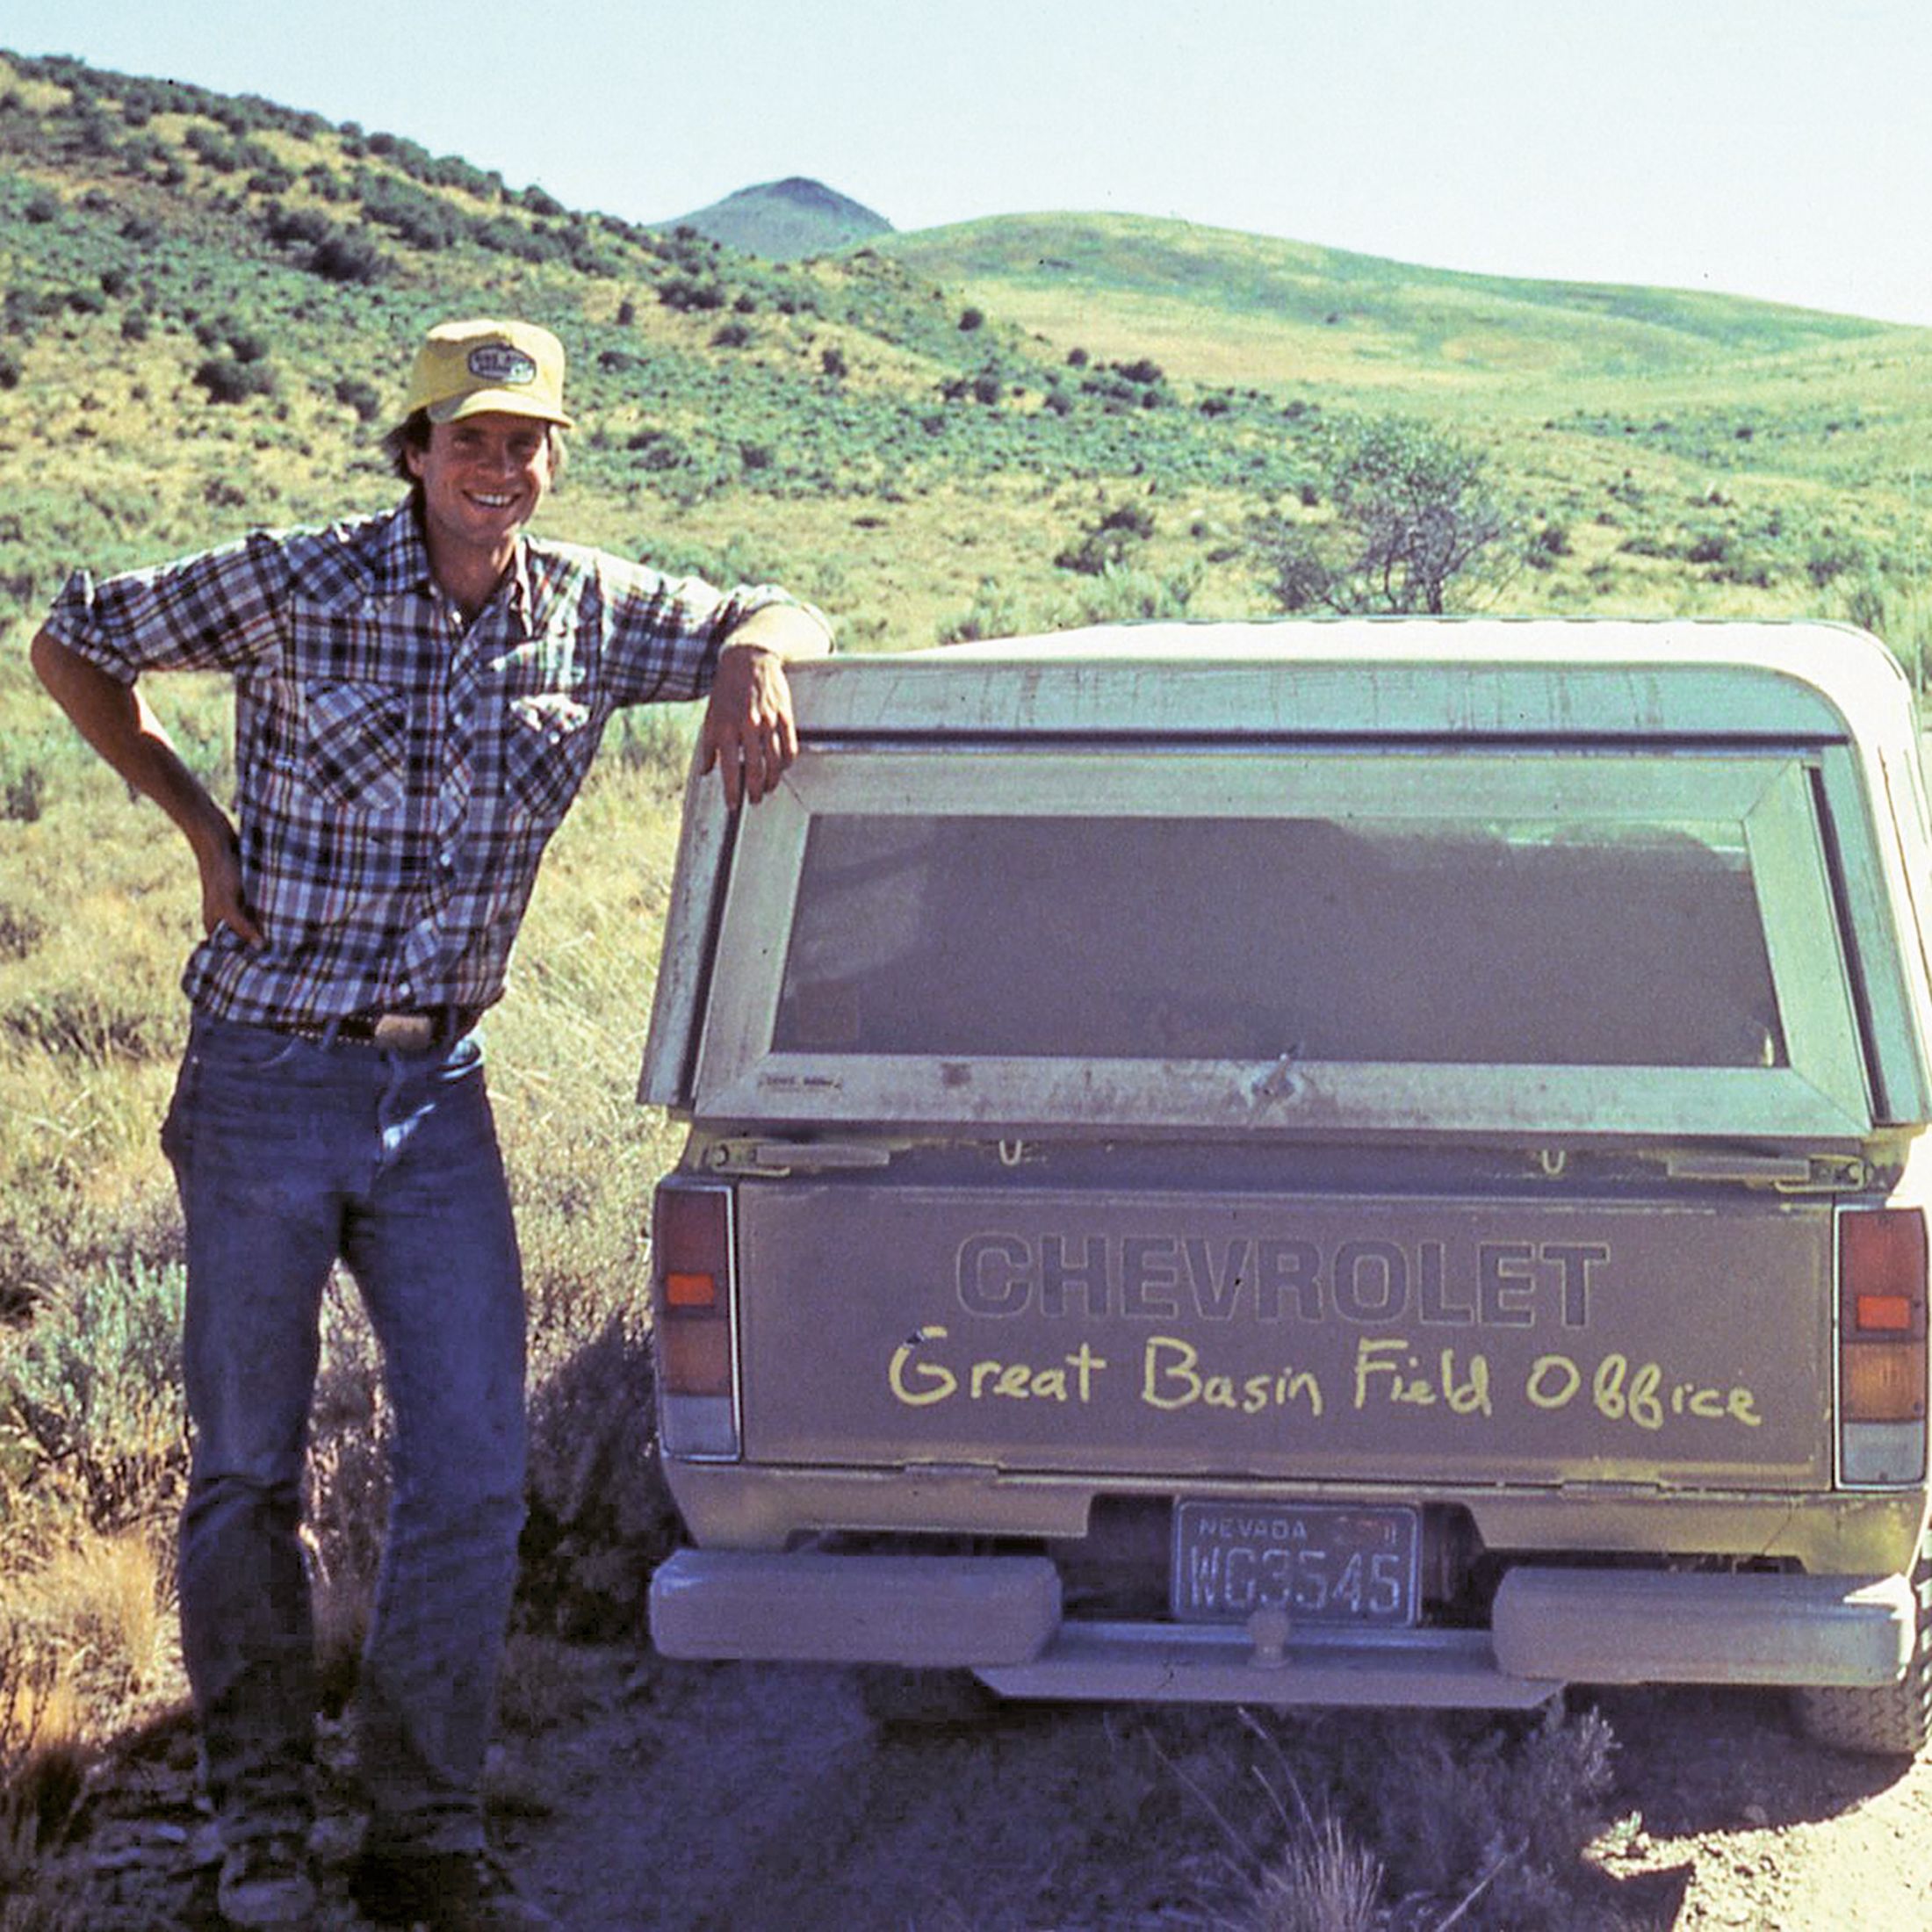 Dave Livermore standing next to truck on a dirt road in desert landscape with rolling hills.